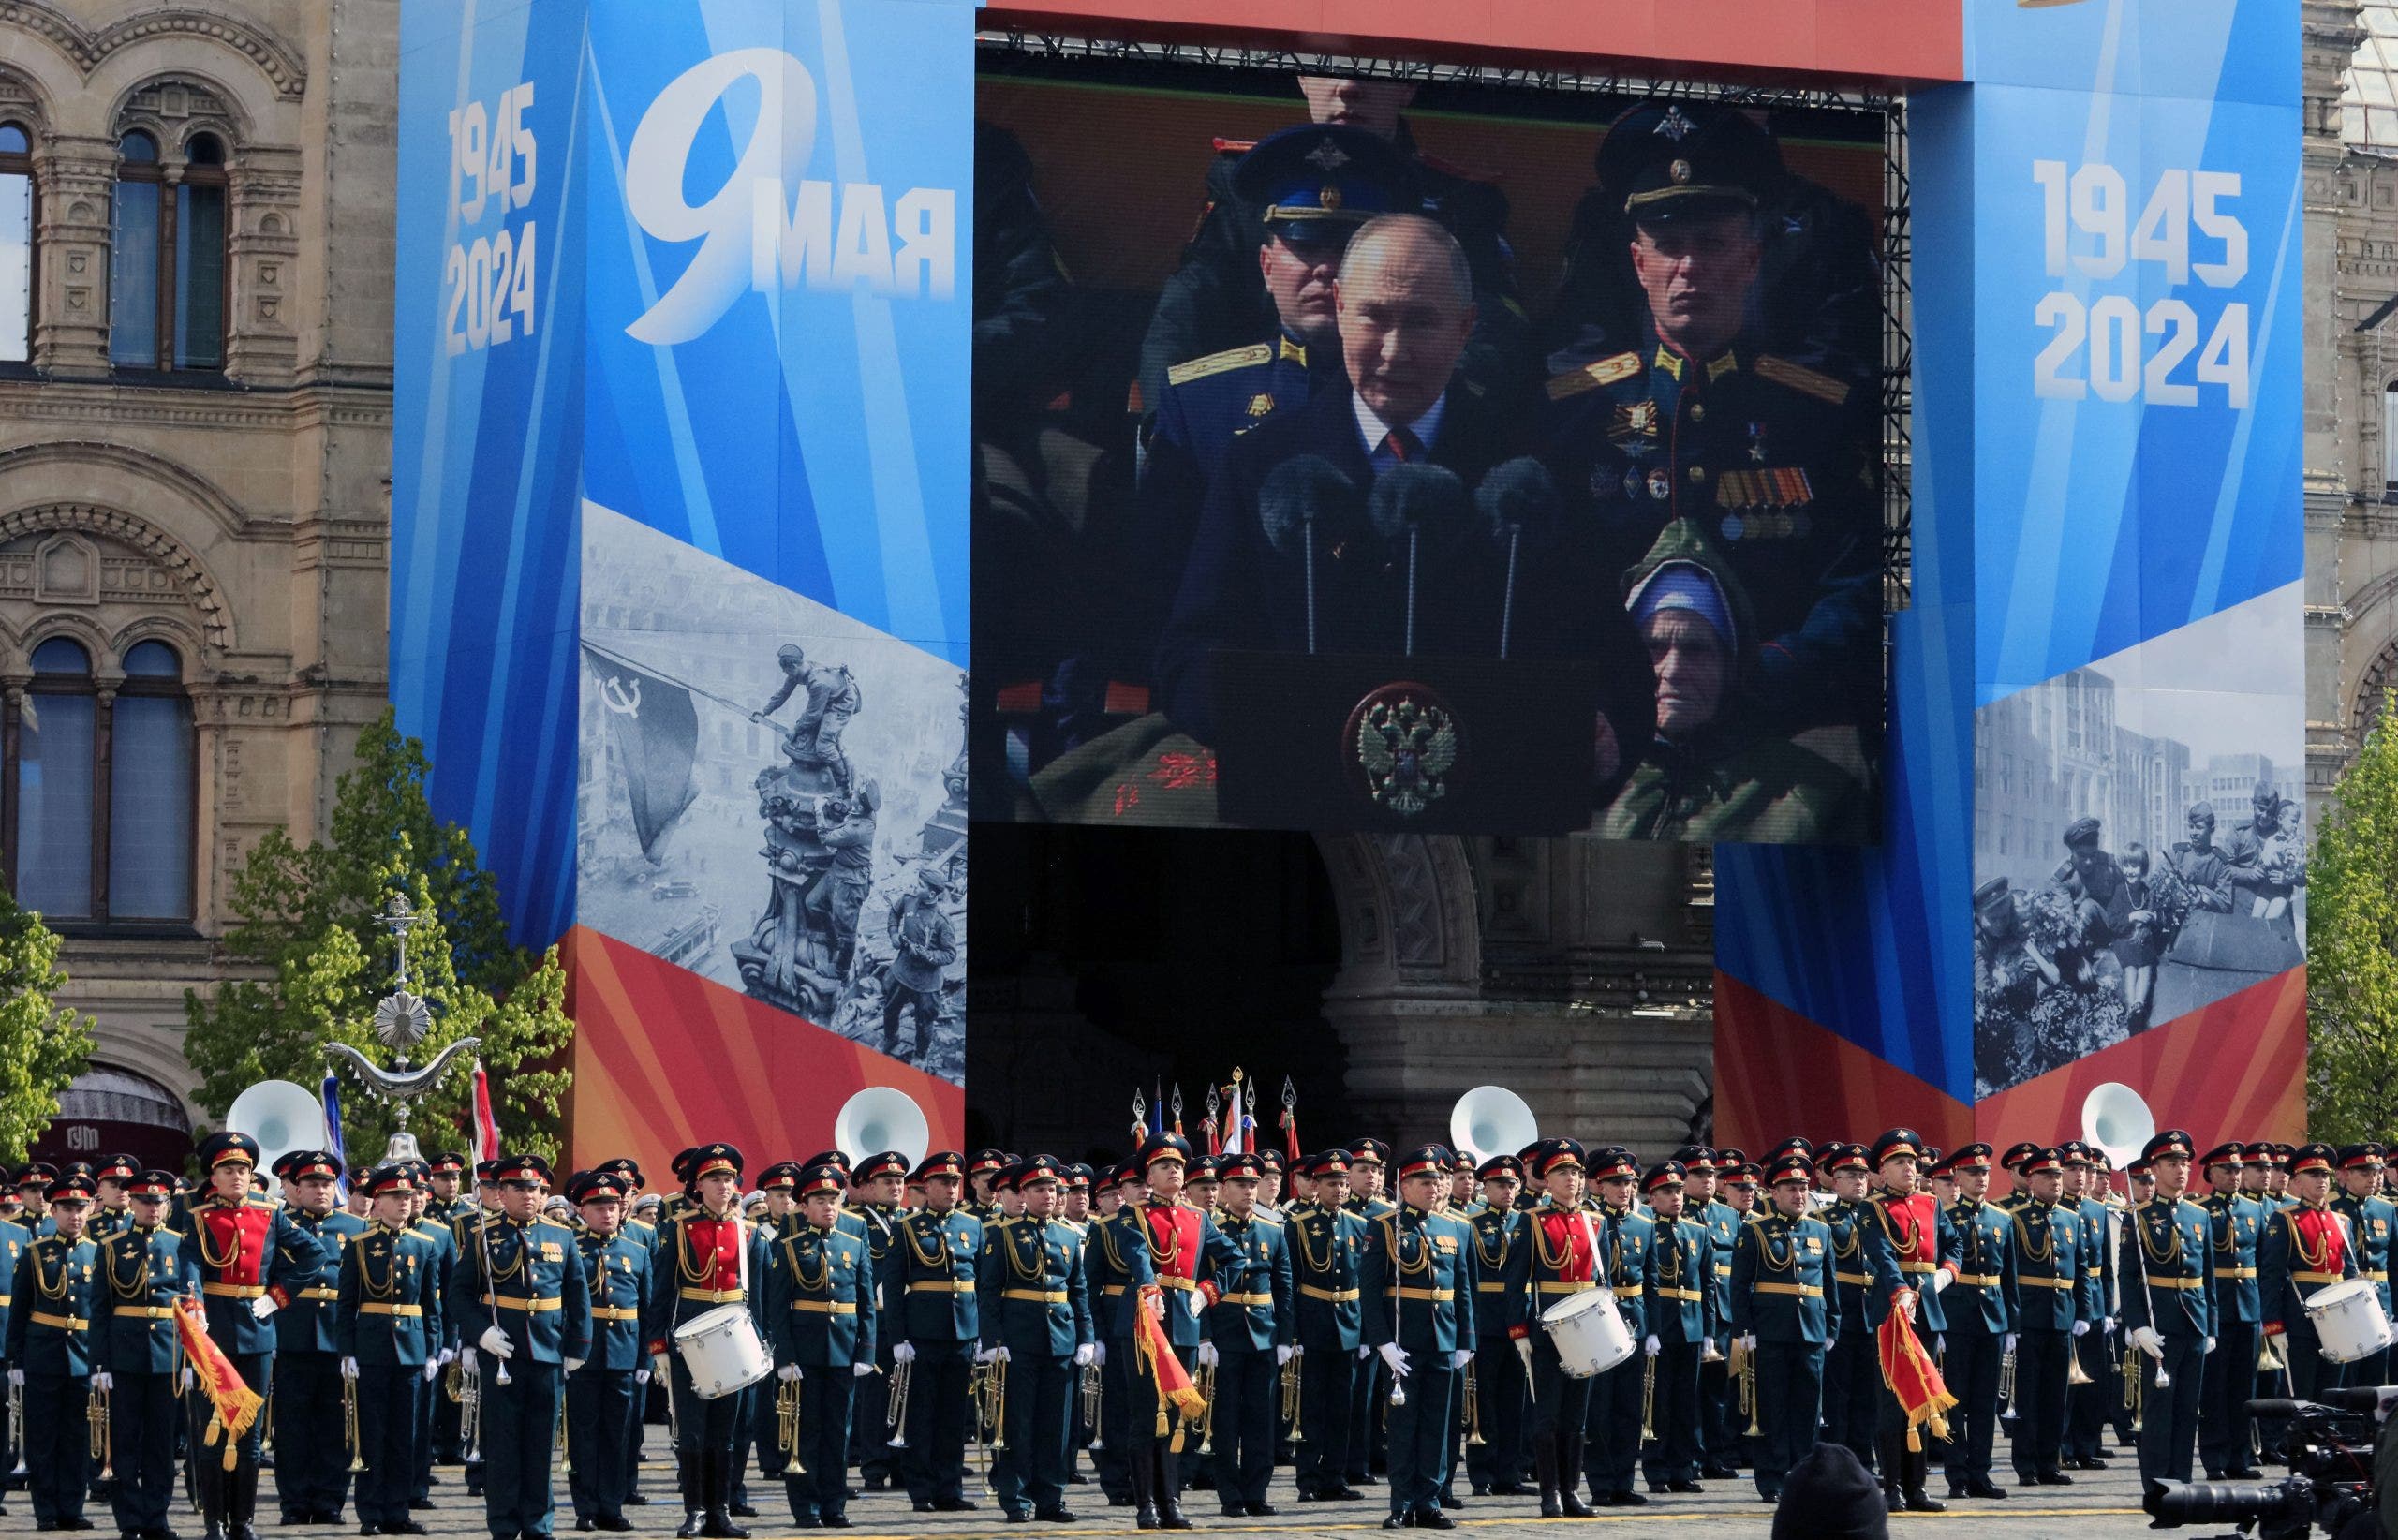 Russian President Vladimir Putin delivers a speech during a Victory Day military parade marking the 79th anniversary of the victory over Nazi Germany in World War II in Moscow, Russia. (Tian Bing/China News Service/VCG via Getty Images)